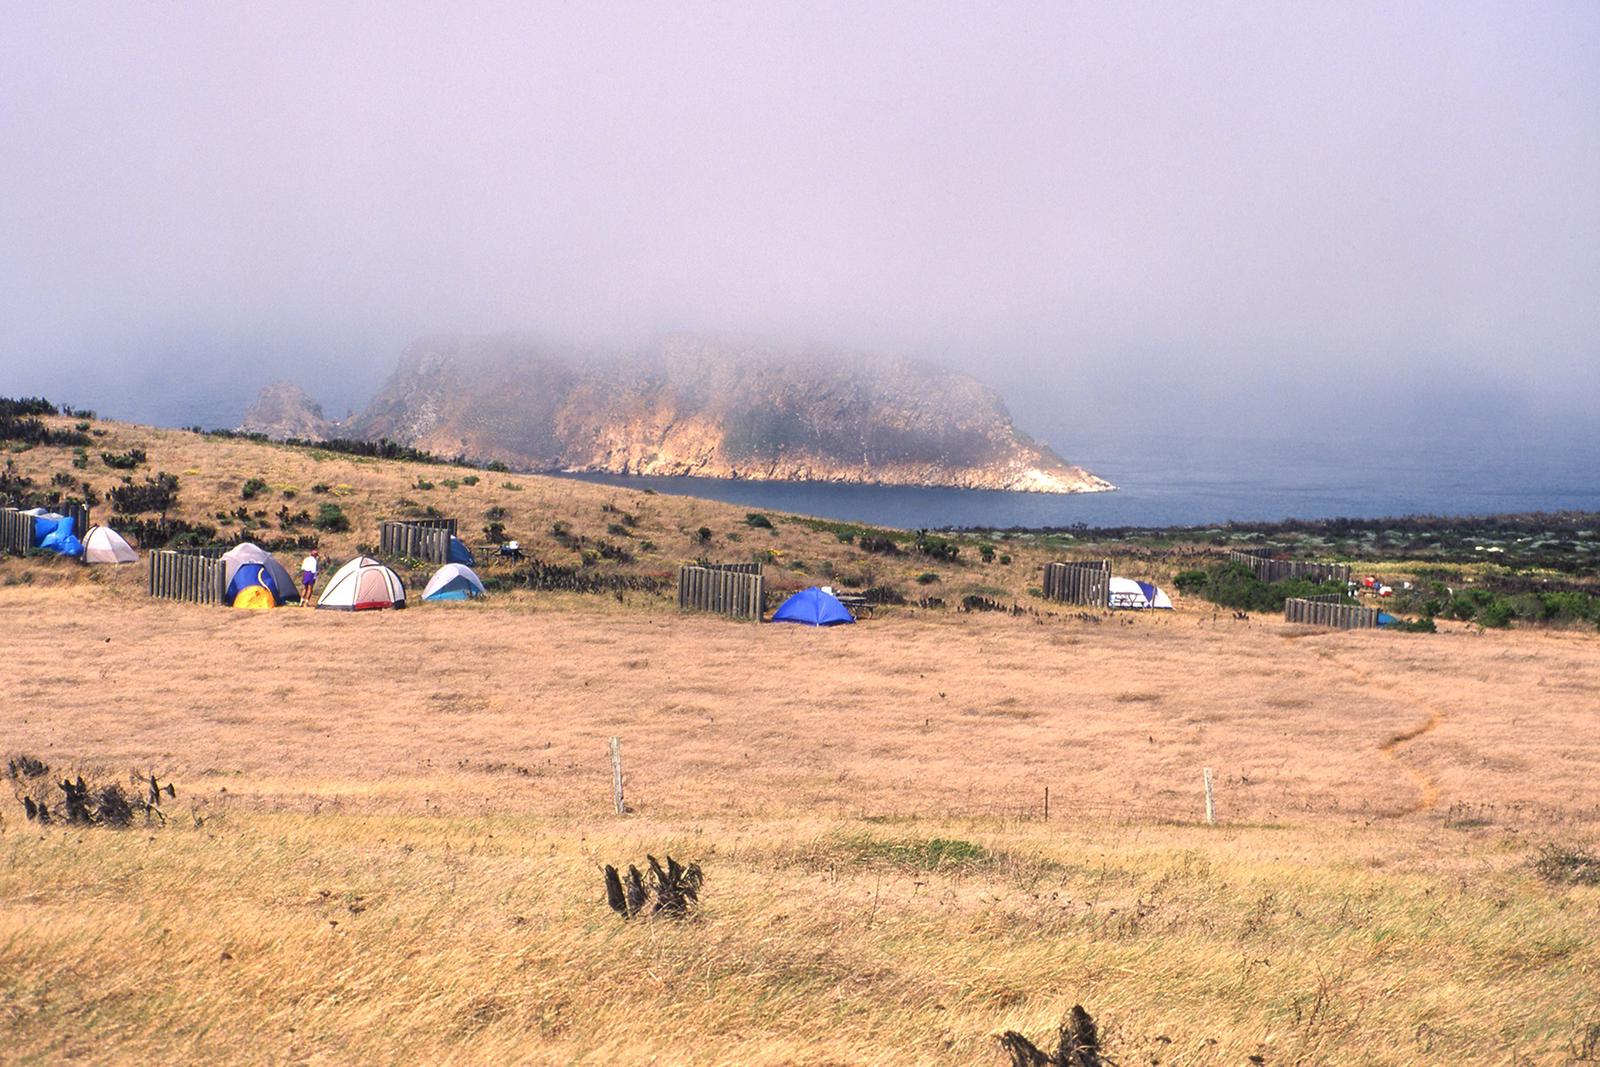 Tents and 5-foot tall windbreaks perched on an ocean bluff overlooking an islet covered in fog.SAN MIGUEL ISLAND